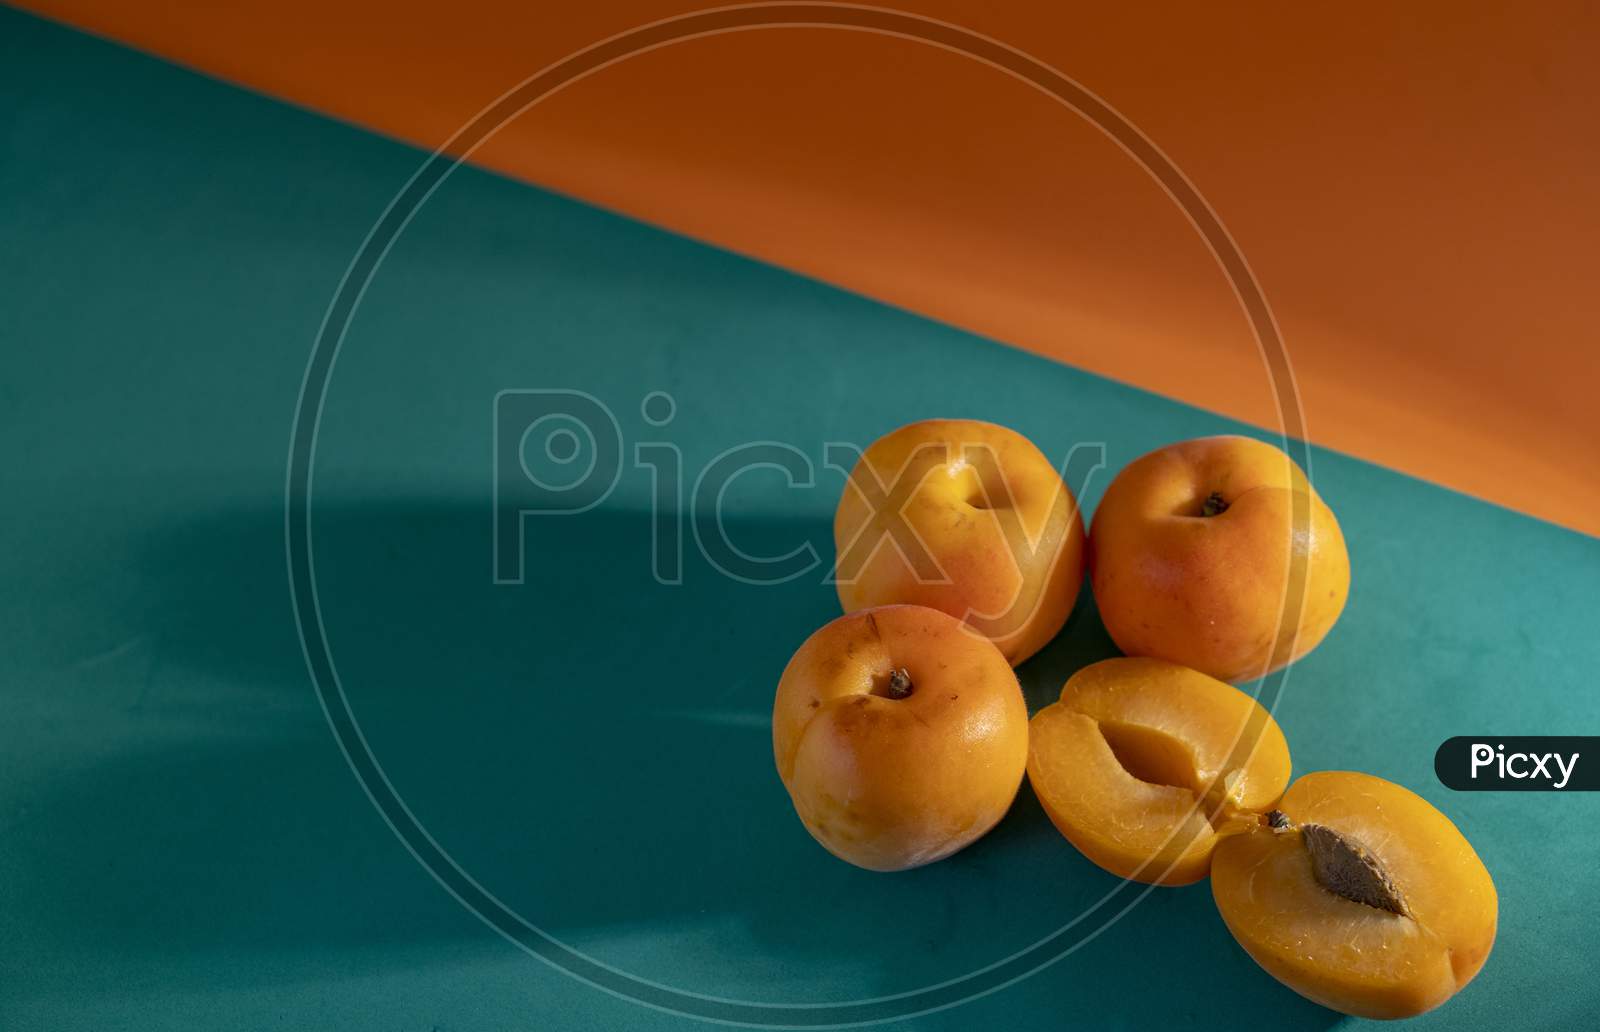 Juicy peach on a orange and green background.